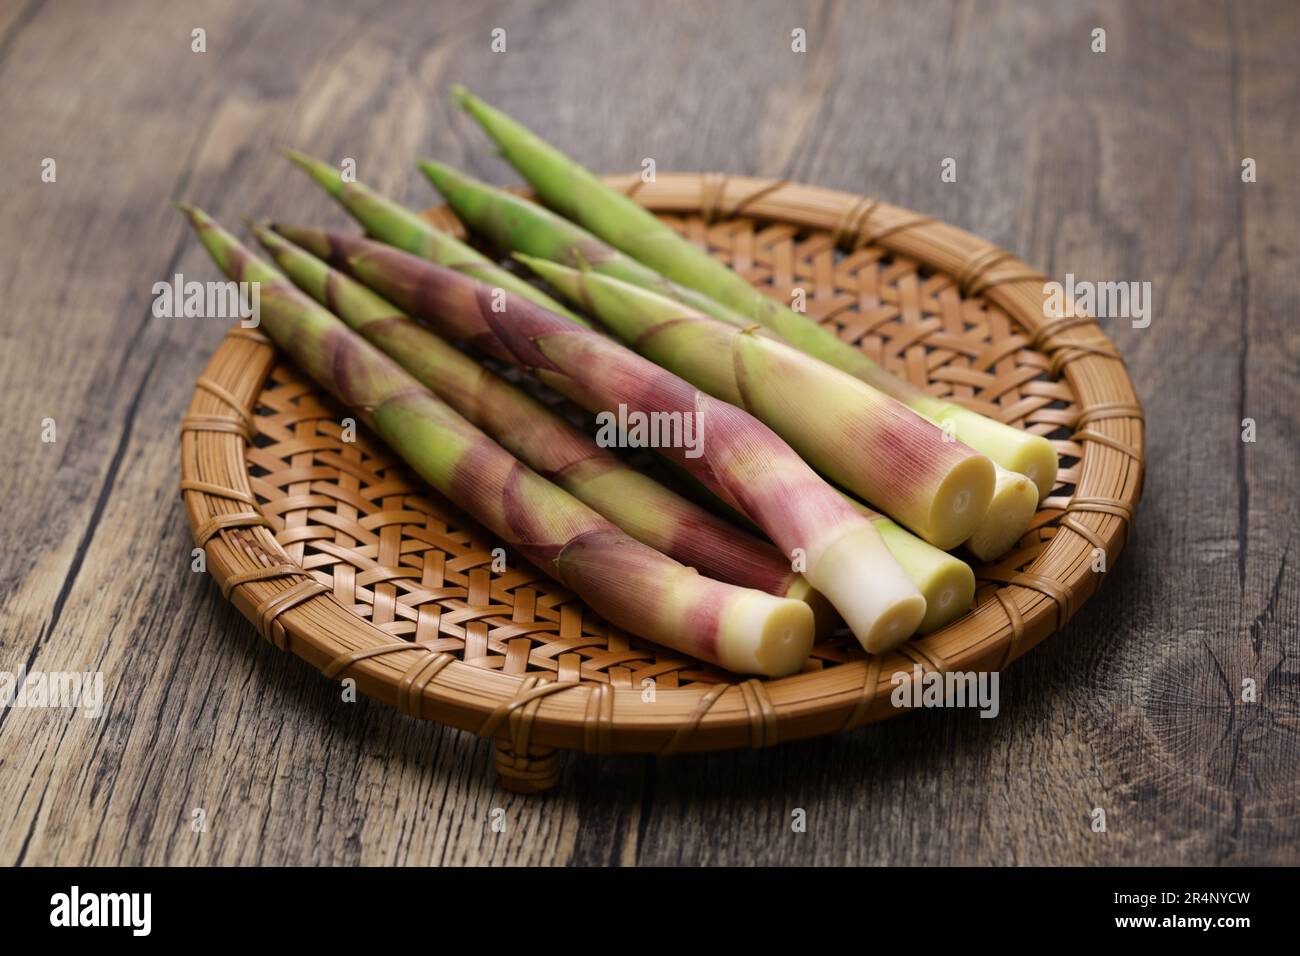 root bent bamboo shoots, Japanese wild vegetable Stock Photo